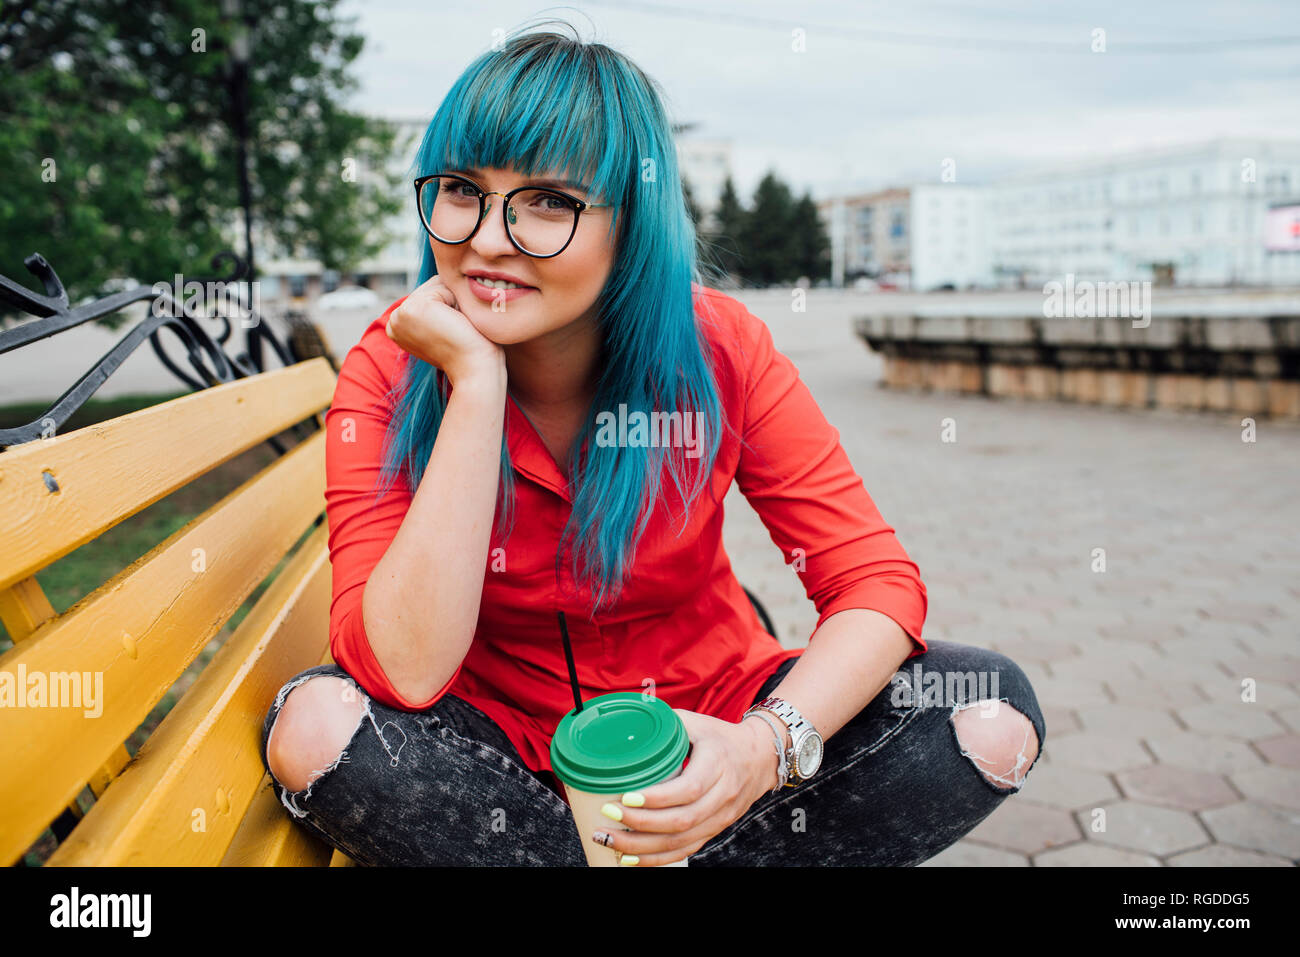 Portrait of smiling young woman with dyed blue hair sitting on a bench with beverage Stock Photo